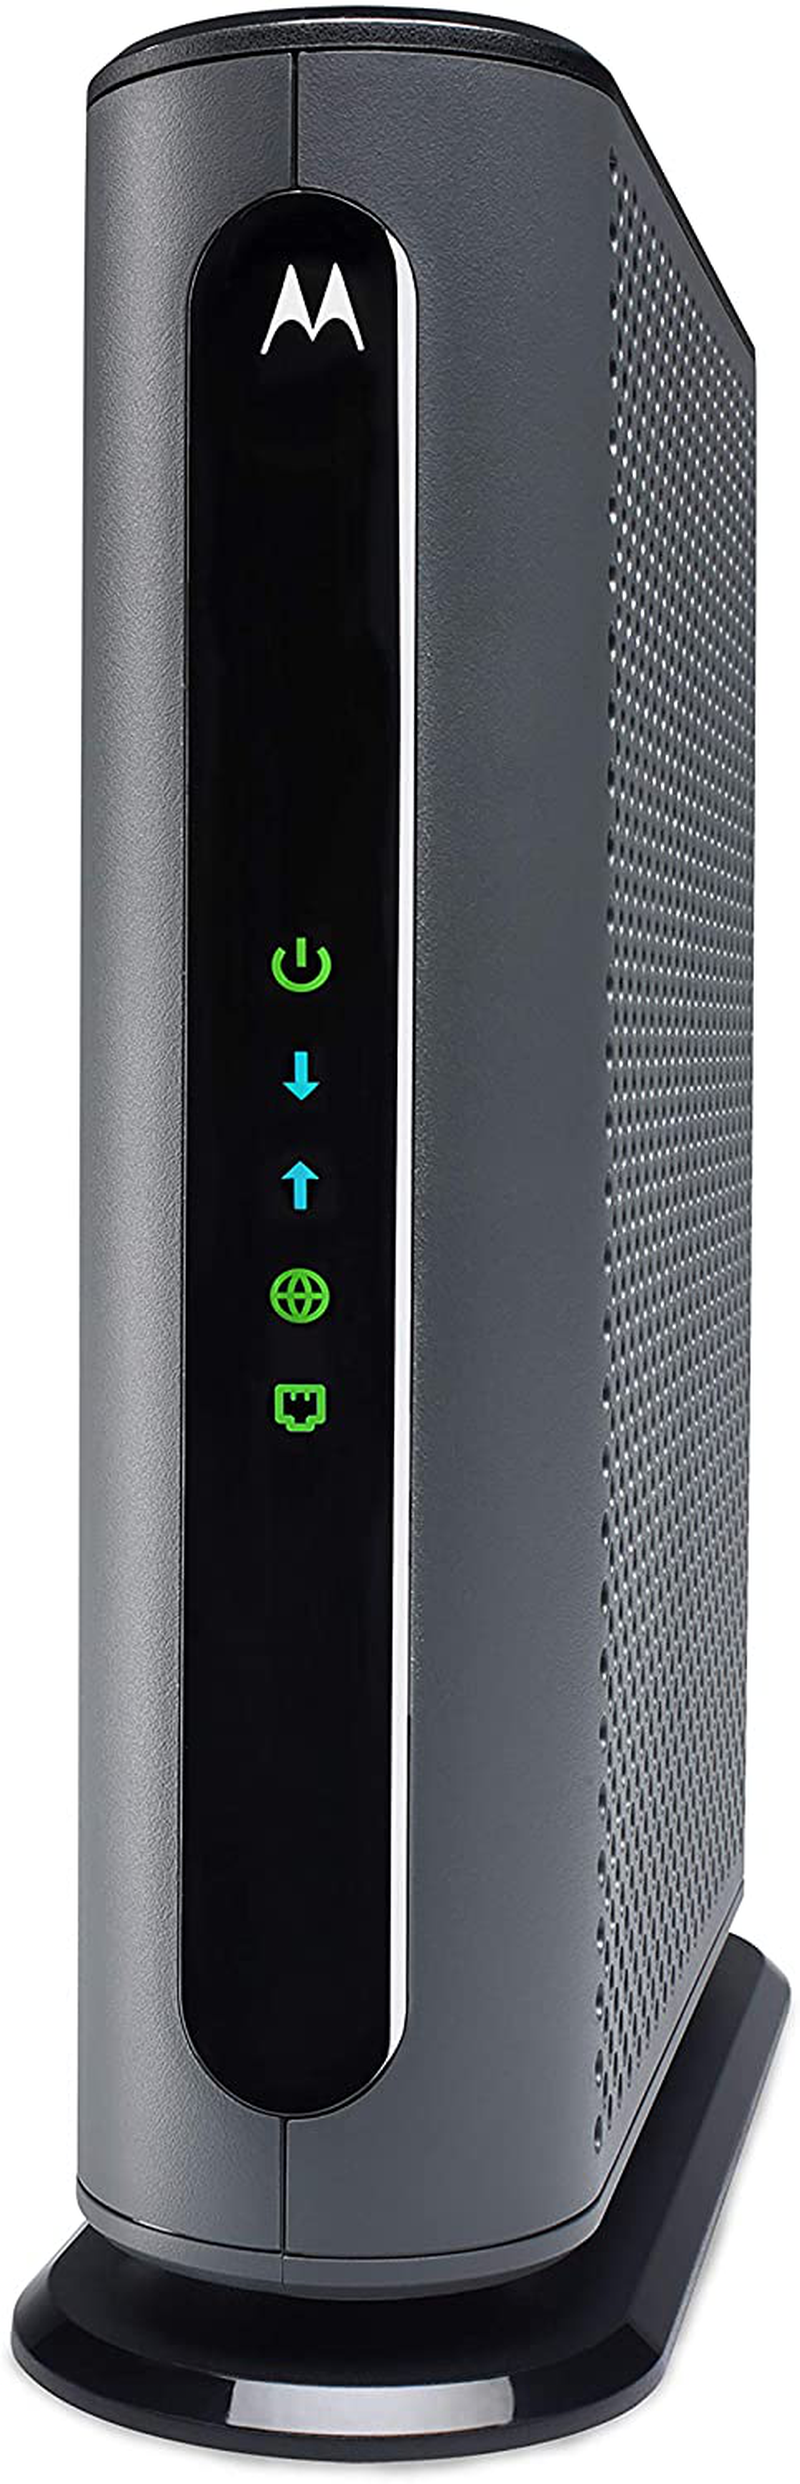 Motorola MB8600 DOCSIS 3.1 Cable Modem, 6 Gbps Max Speed. Approved for Comcast Xfinity Gigabit, Cox Gigablast, and More, Black Electronics > Networking > Modems MTRLC LLC DOCSIS 3.0 (1 Gbps Ethernet Port)  